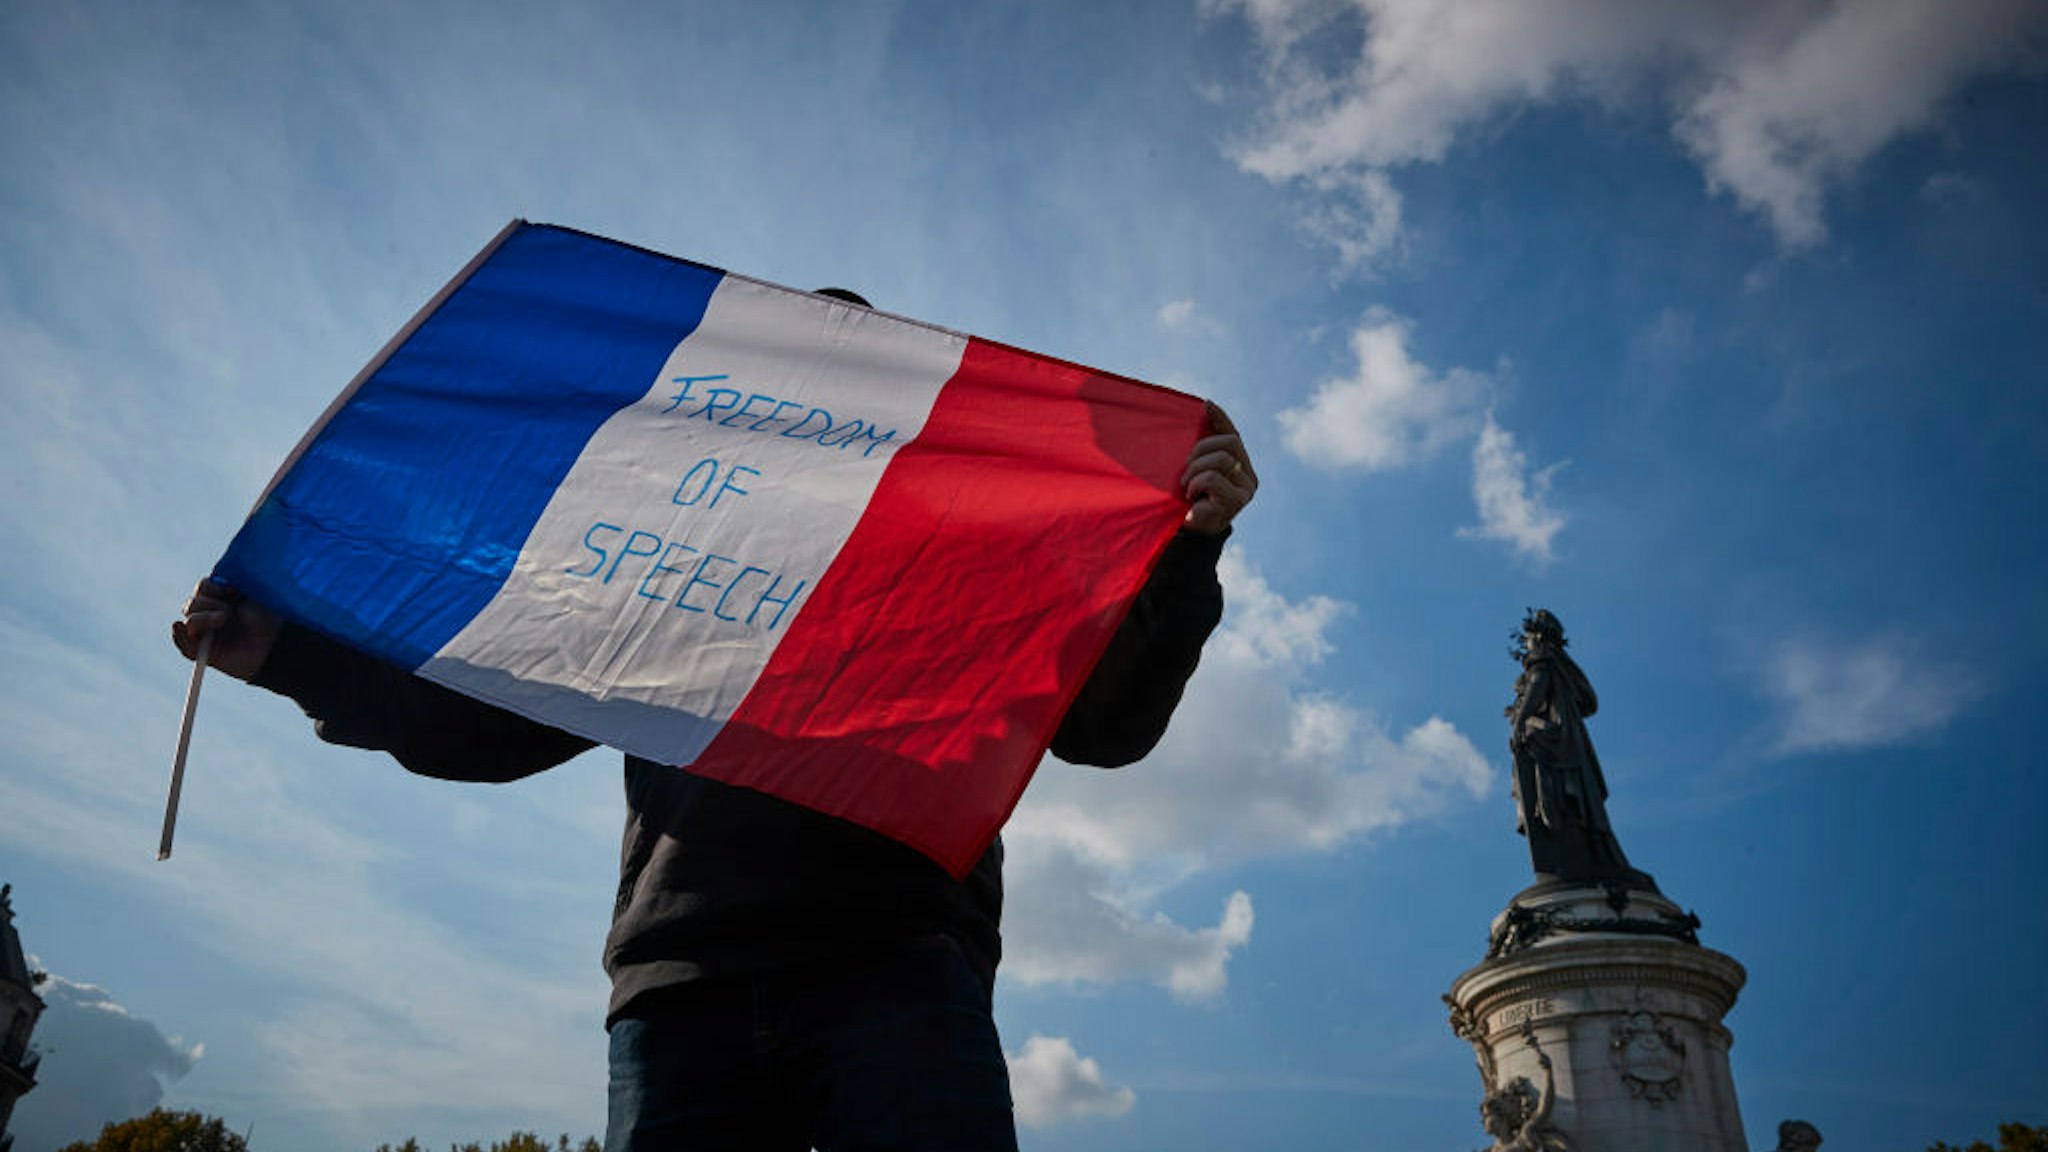 PARIS, FRANCE - OCTOBER 18: A protestor waves a French Tricolor flag with 'Freedom of Speech' written on it during an anti-terrorism vigil at Place de La Republique for the murdered school teacher Samuel Paty who was killed in a terrorist attack in the suburbs of Paris on October 18, 2020 in Paris, France. Thousands of people turned out to show solidarity and express their support for freedom of speech in the wake of Friday's attack. France launched an anti-terrorism investigation after the October 16 incident where police shot the 18 year-old assailant who decapitated the history-geography teacher for having shown a caricature of prophet Mohamed as an example of freedom of speech at the College Bois d'Aulne middle-school. (Photo by Kiran Ridley/Getty Images)